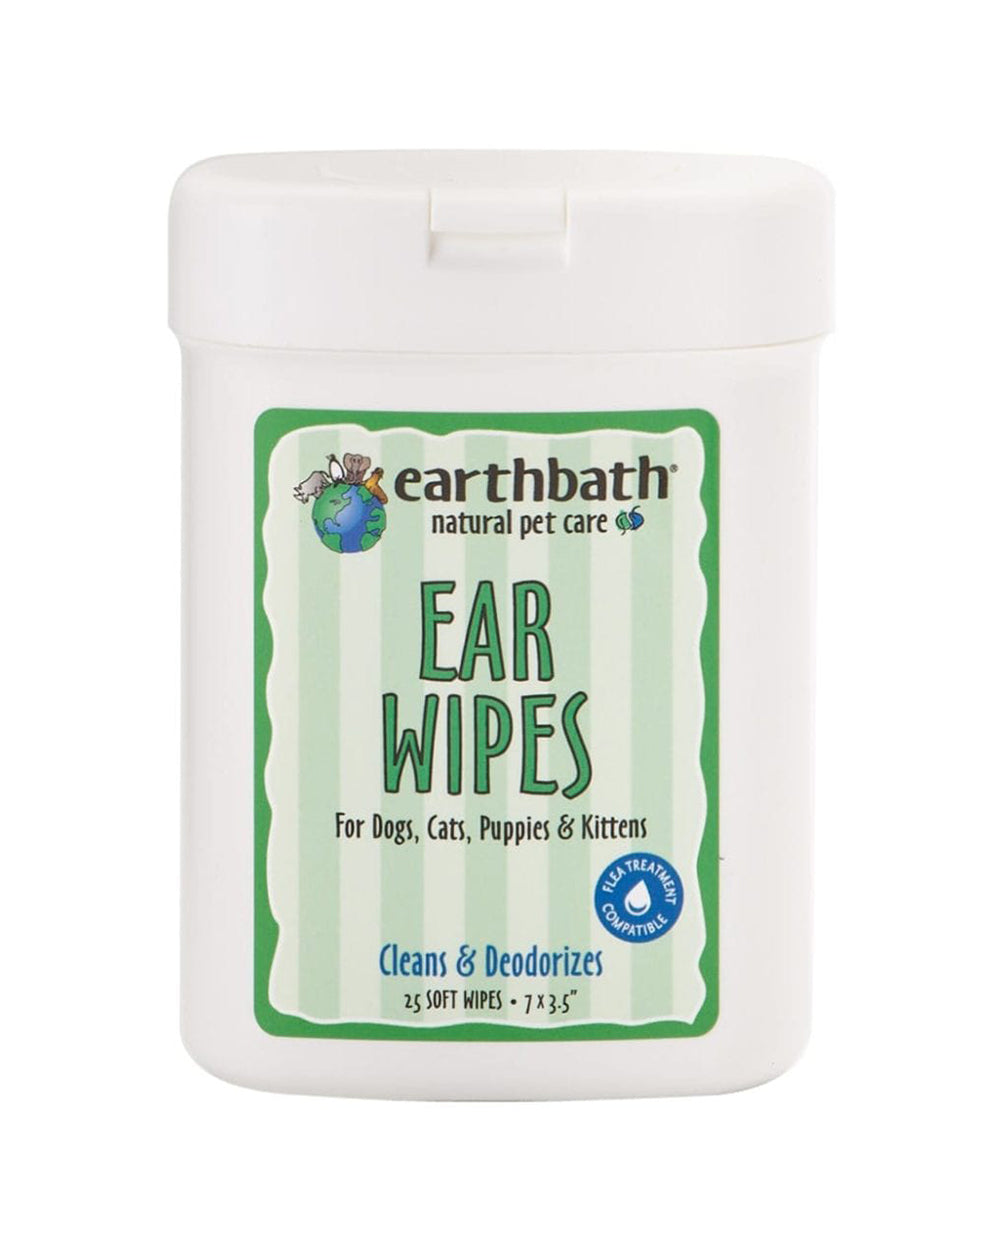 Ear Wipes for Pets